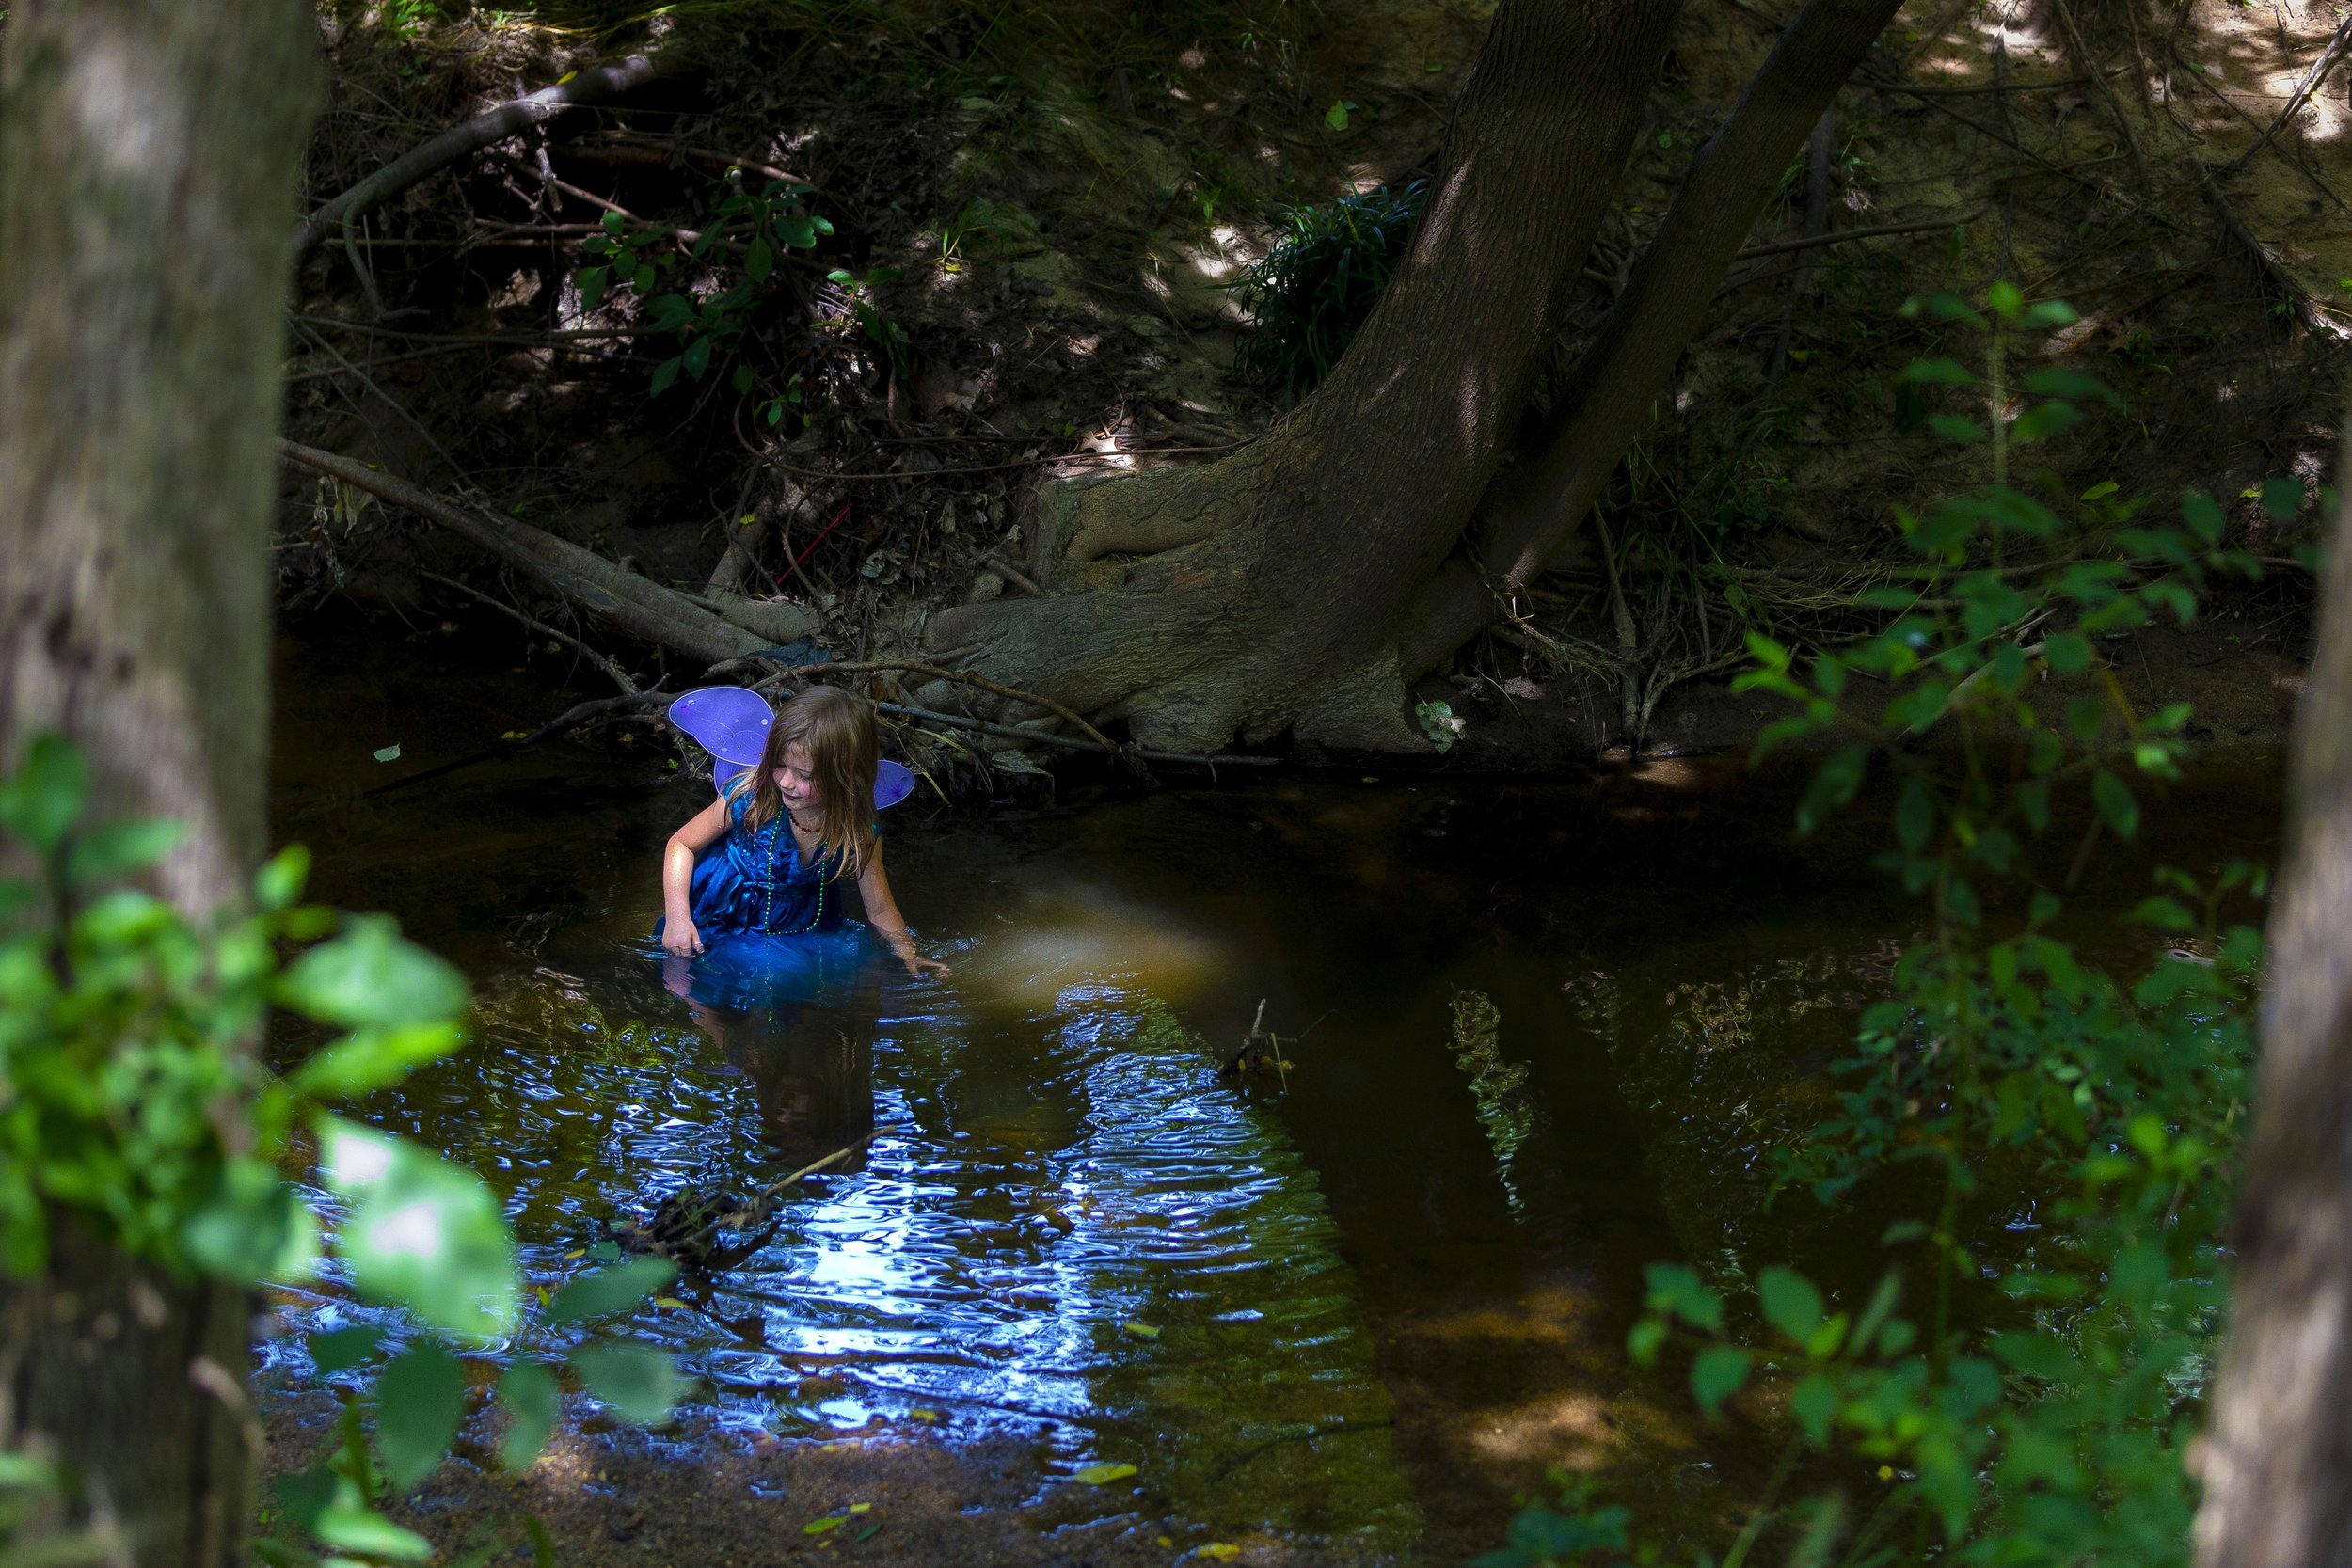  Riley Welborne, a five-year-old fairy, searches for hidden fairy treasure in North Buffalo Creek during the Summer Solstice Festival at the Greensboro Arboretum in Greensboro, N.C., on Saturday, June 19, 2021.   